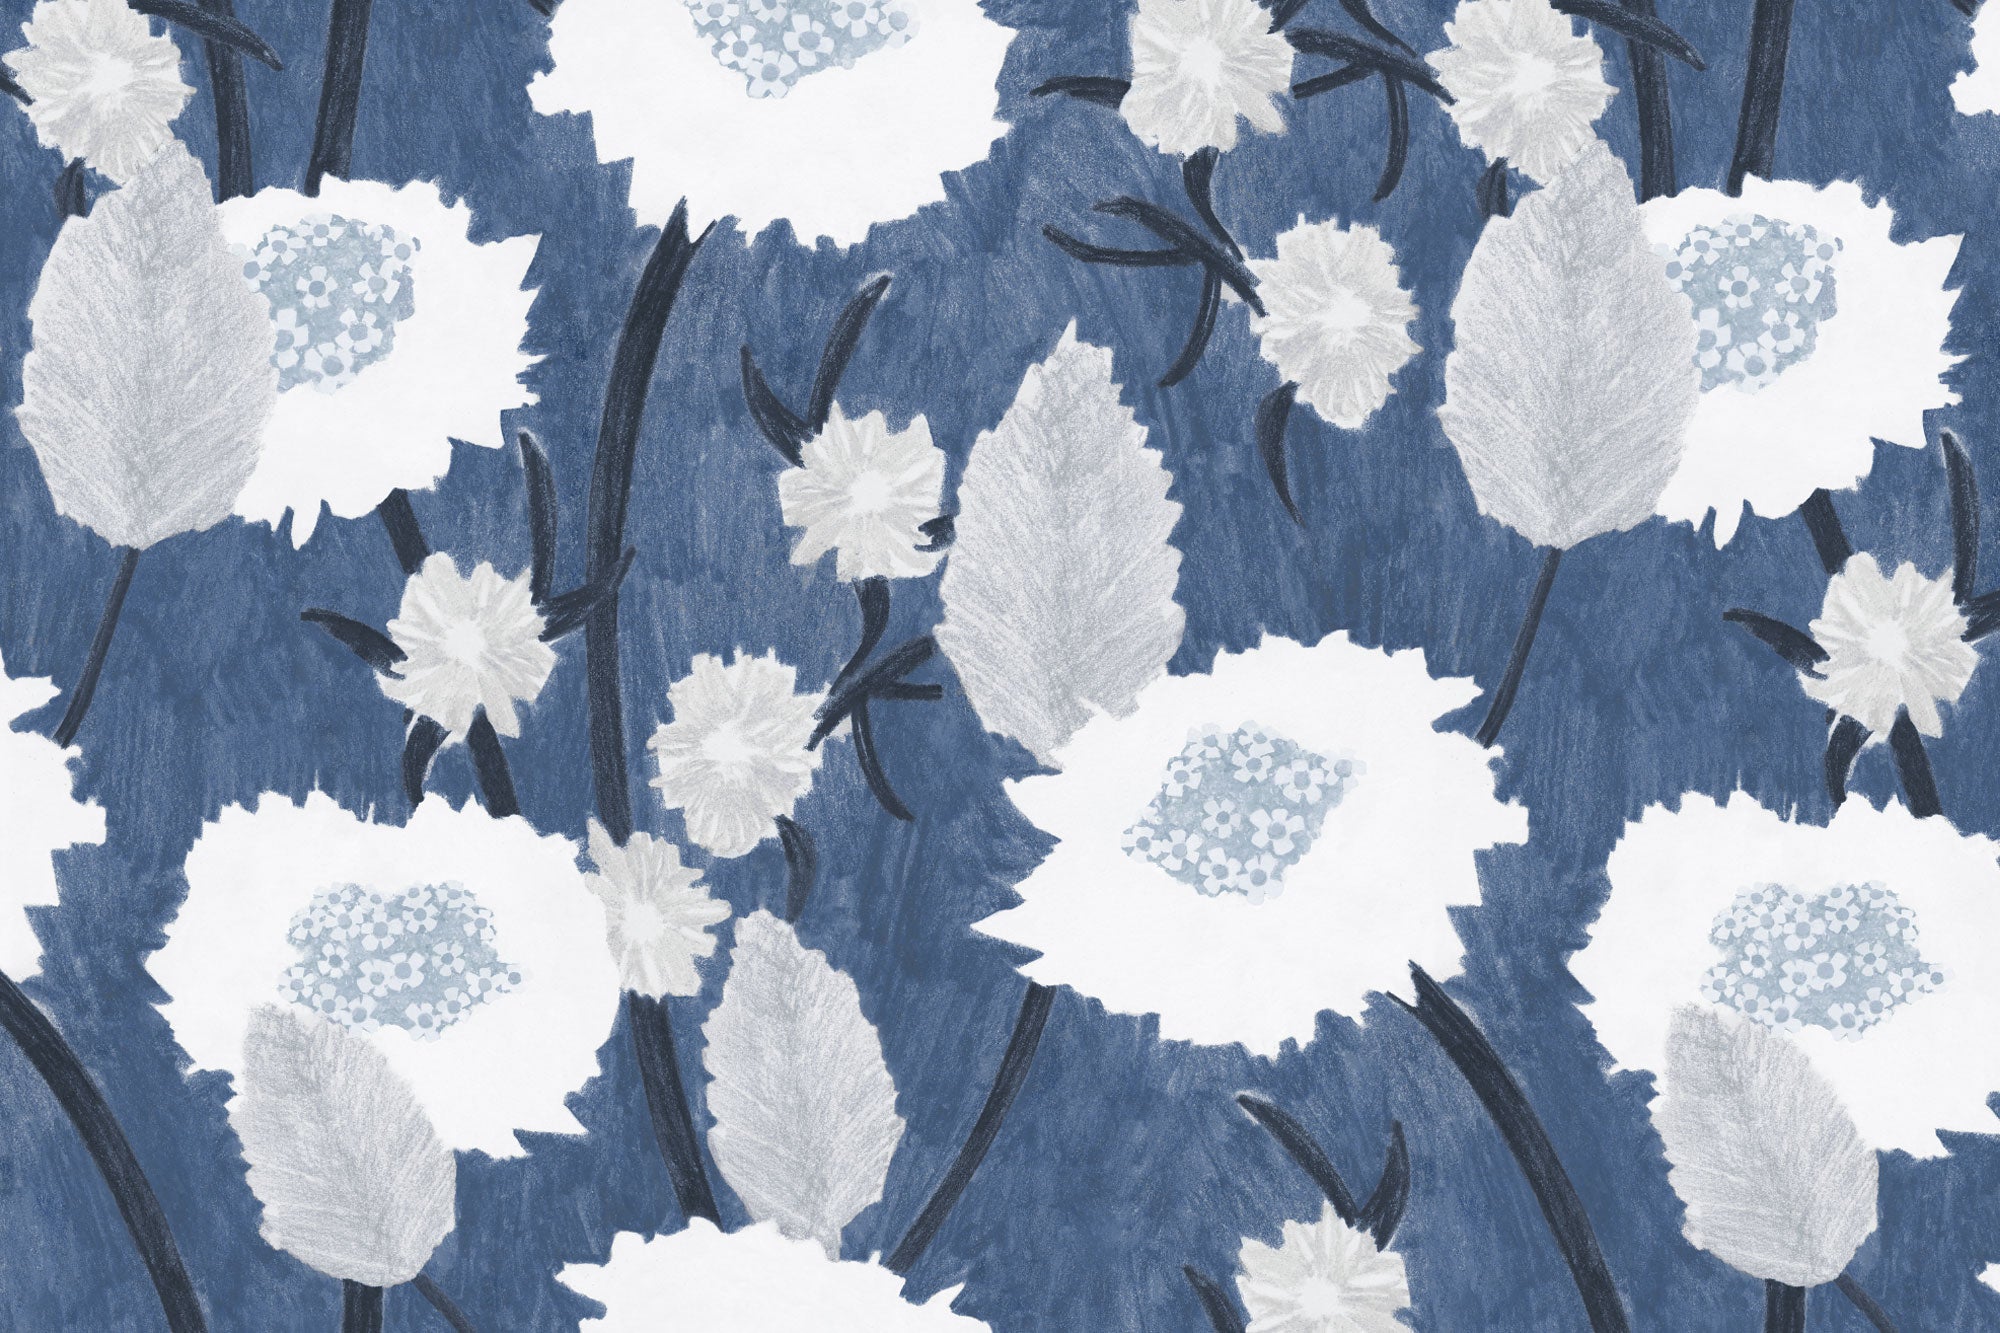 Detail of wallpaper in a playful floral print in shades of white and gray on a navy field.